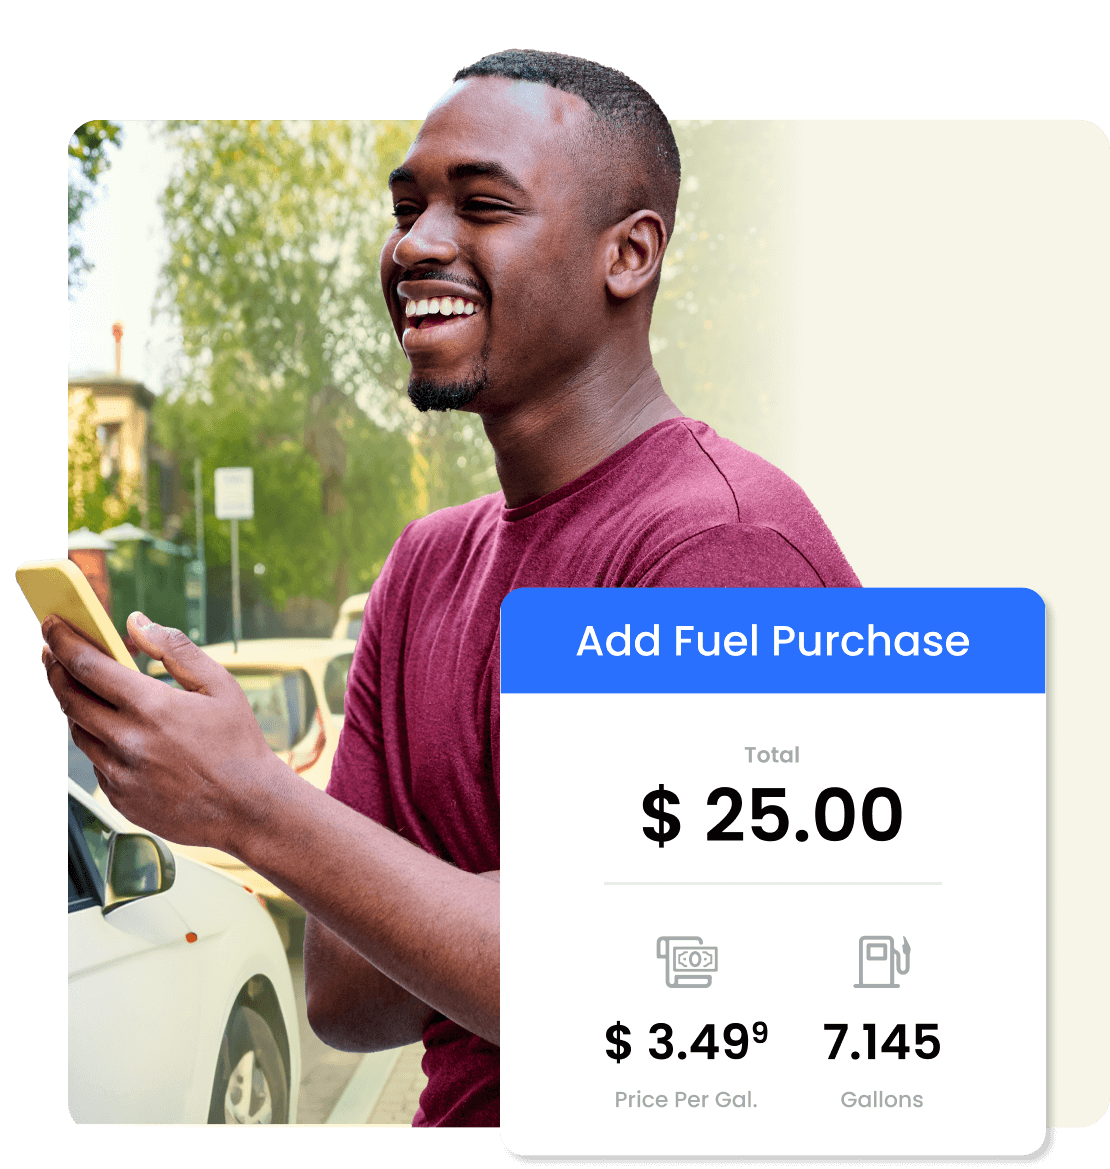 With TripLog, it couldn't be simpler to track your fuel purchases. You can enter what you spend manually, or simply take a photo of your gas receipt and our app's OCR capabilities will fill in the rest.